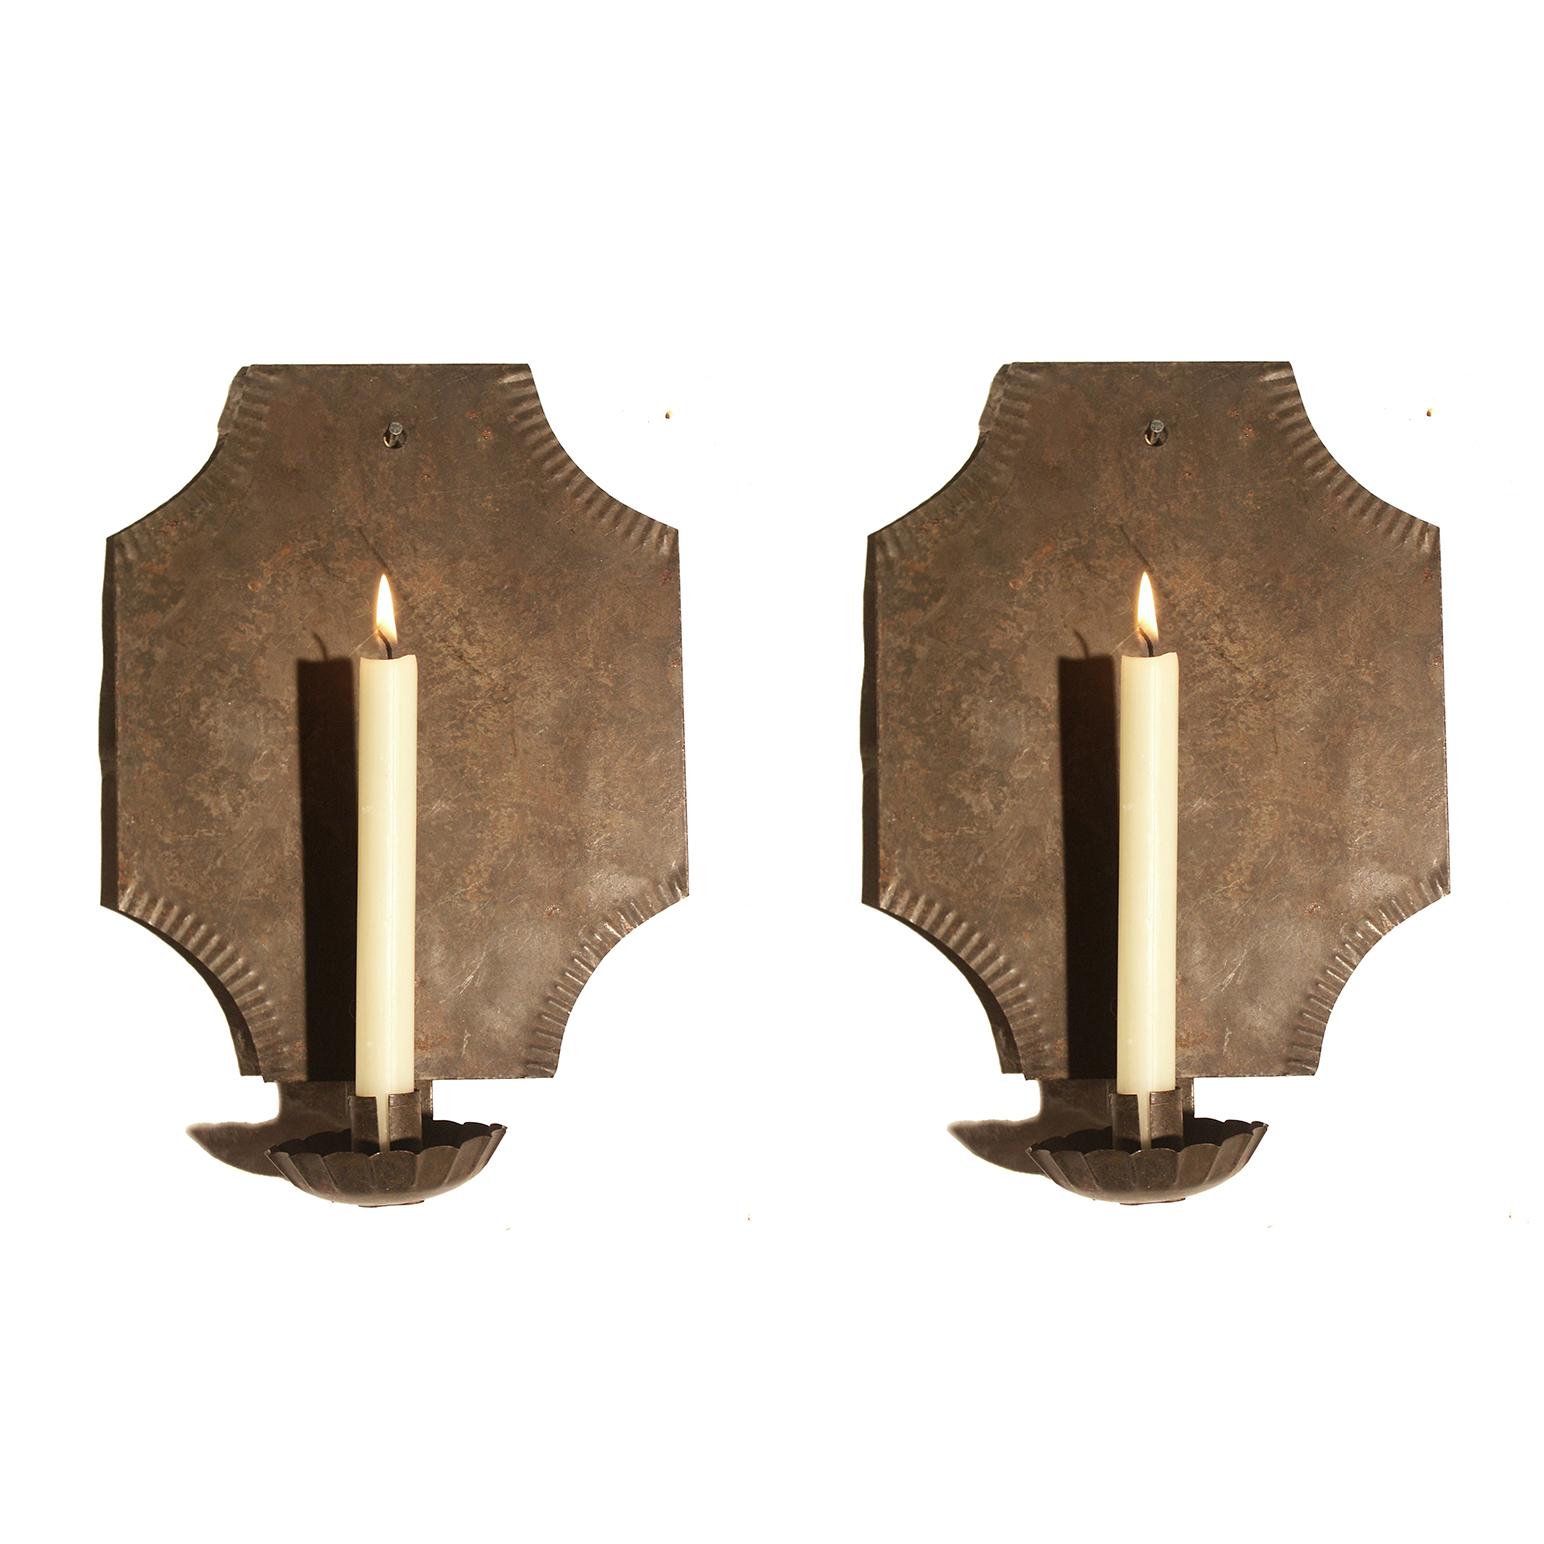 Surviving pieces of vernacular lighting are extremely rare and it is hard to source convincing re-creations. These are copies of a period sconce from The Card Room, Red Lion, Inn, Philadelphia and have a plausible antiqued patina.

SIngle candle